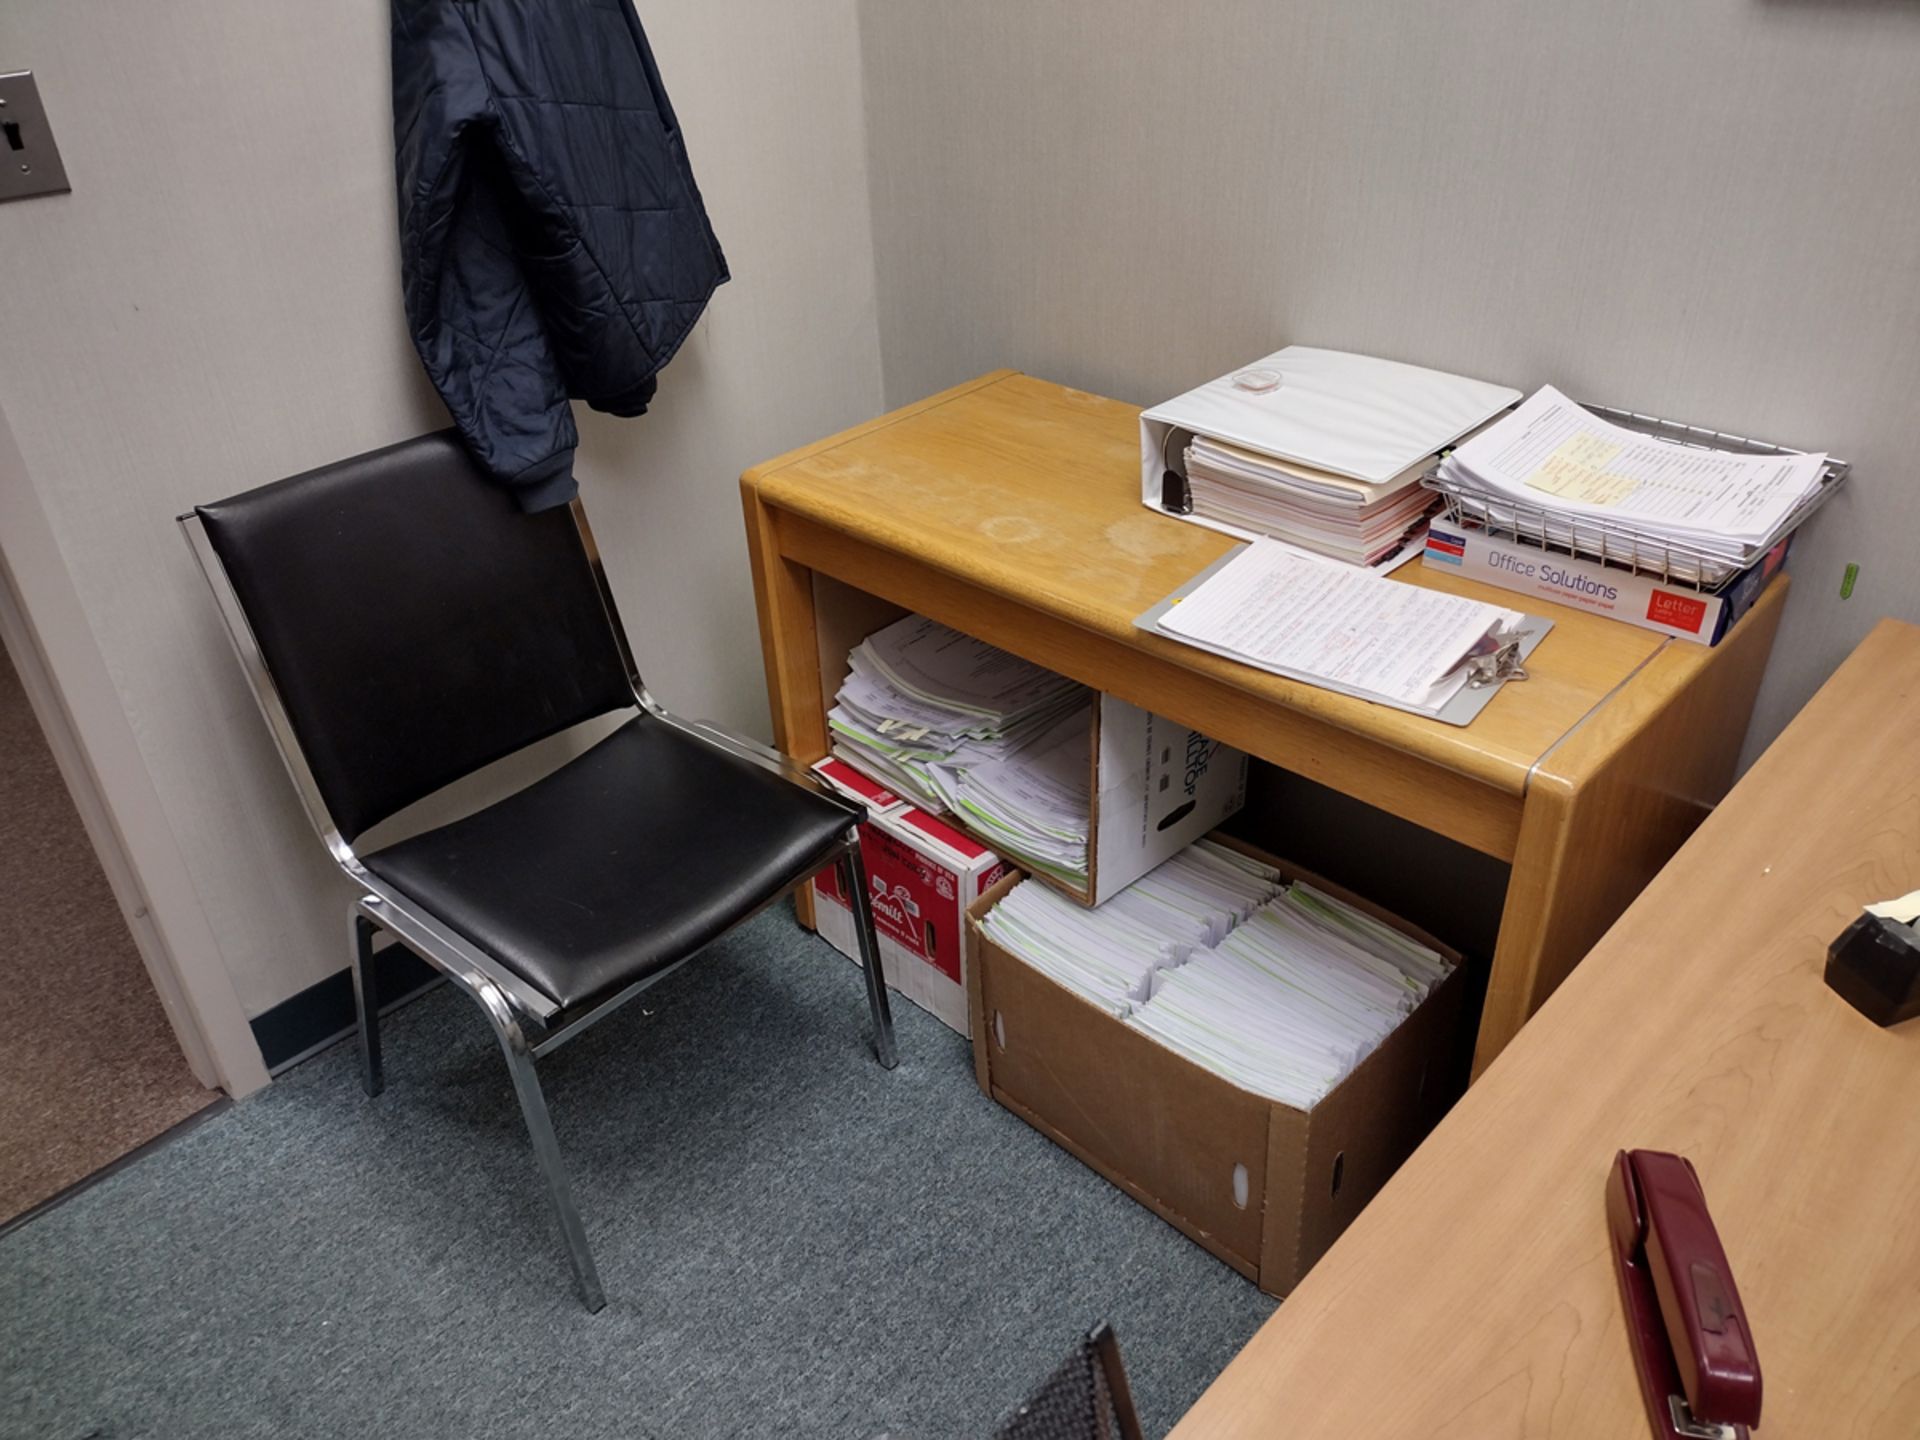 Group of Office Furniture Throughout Rooms - Image 15 of 17